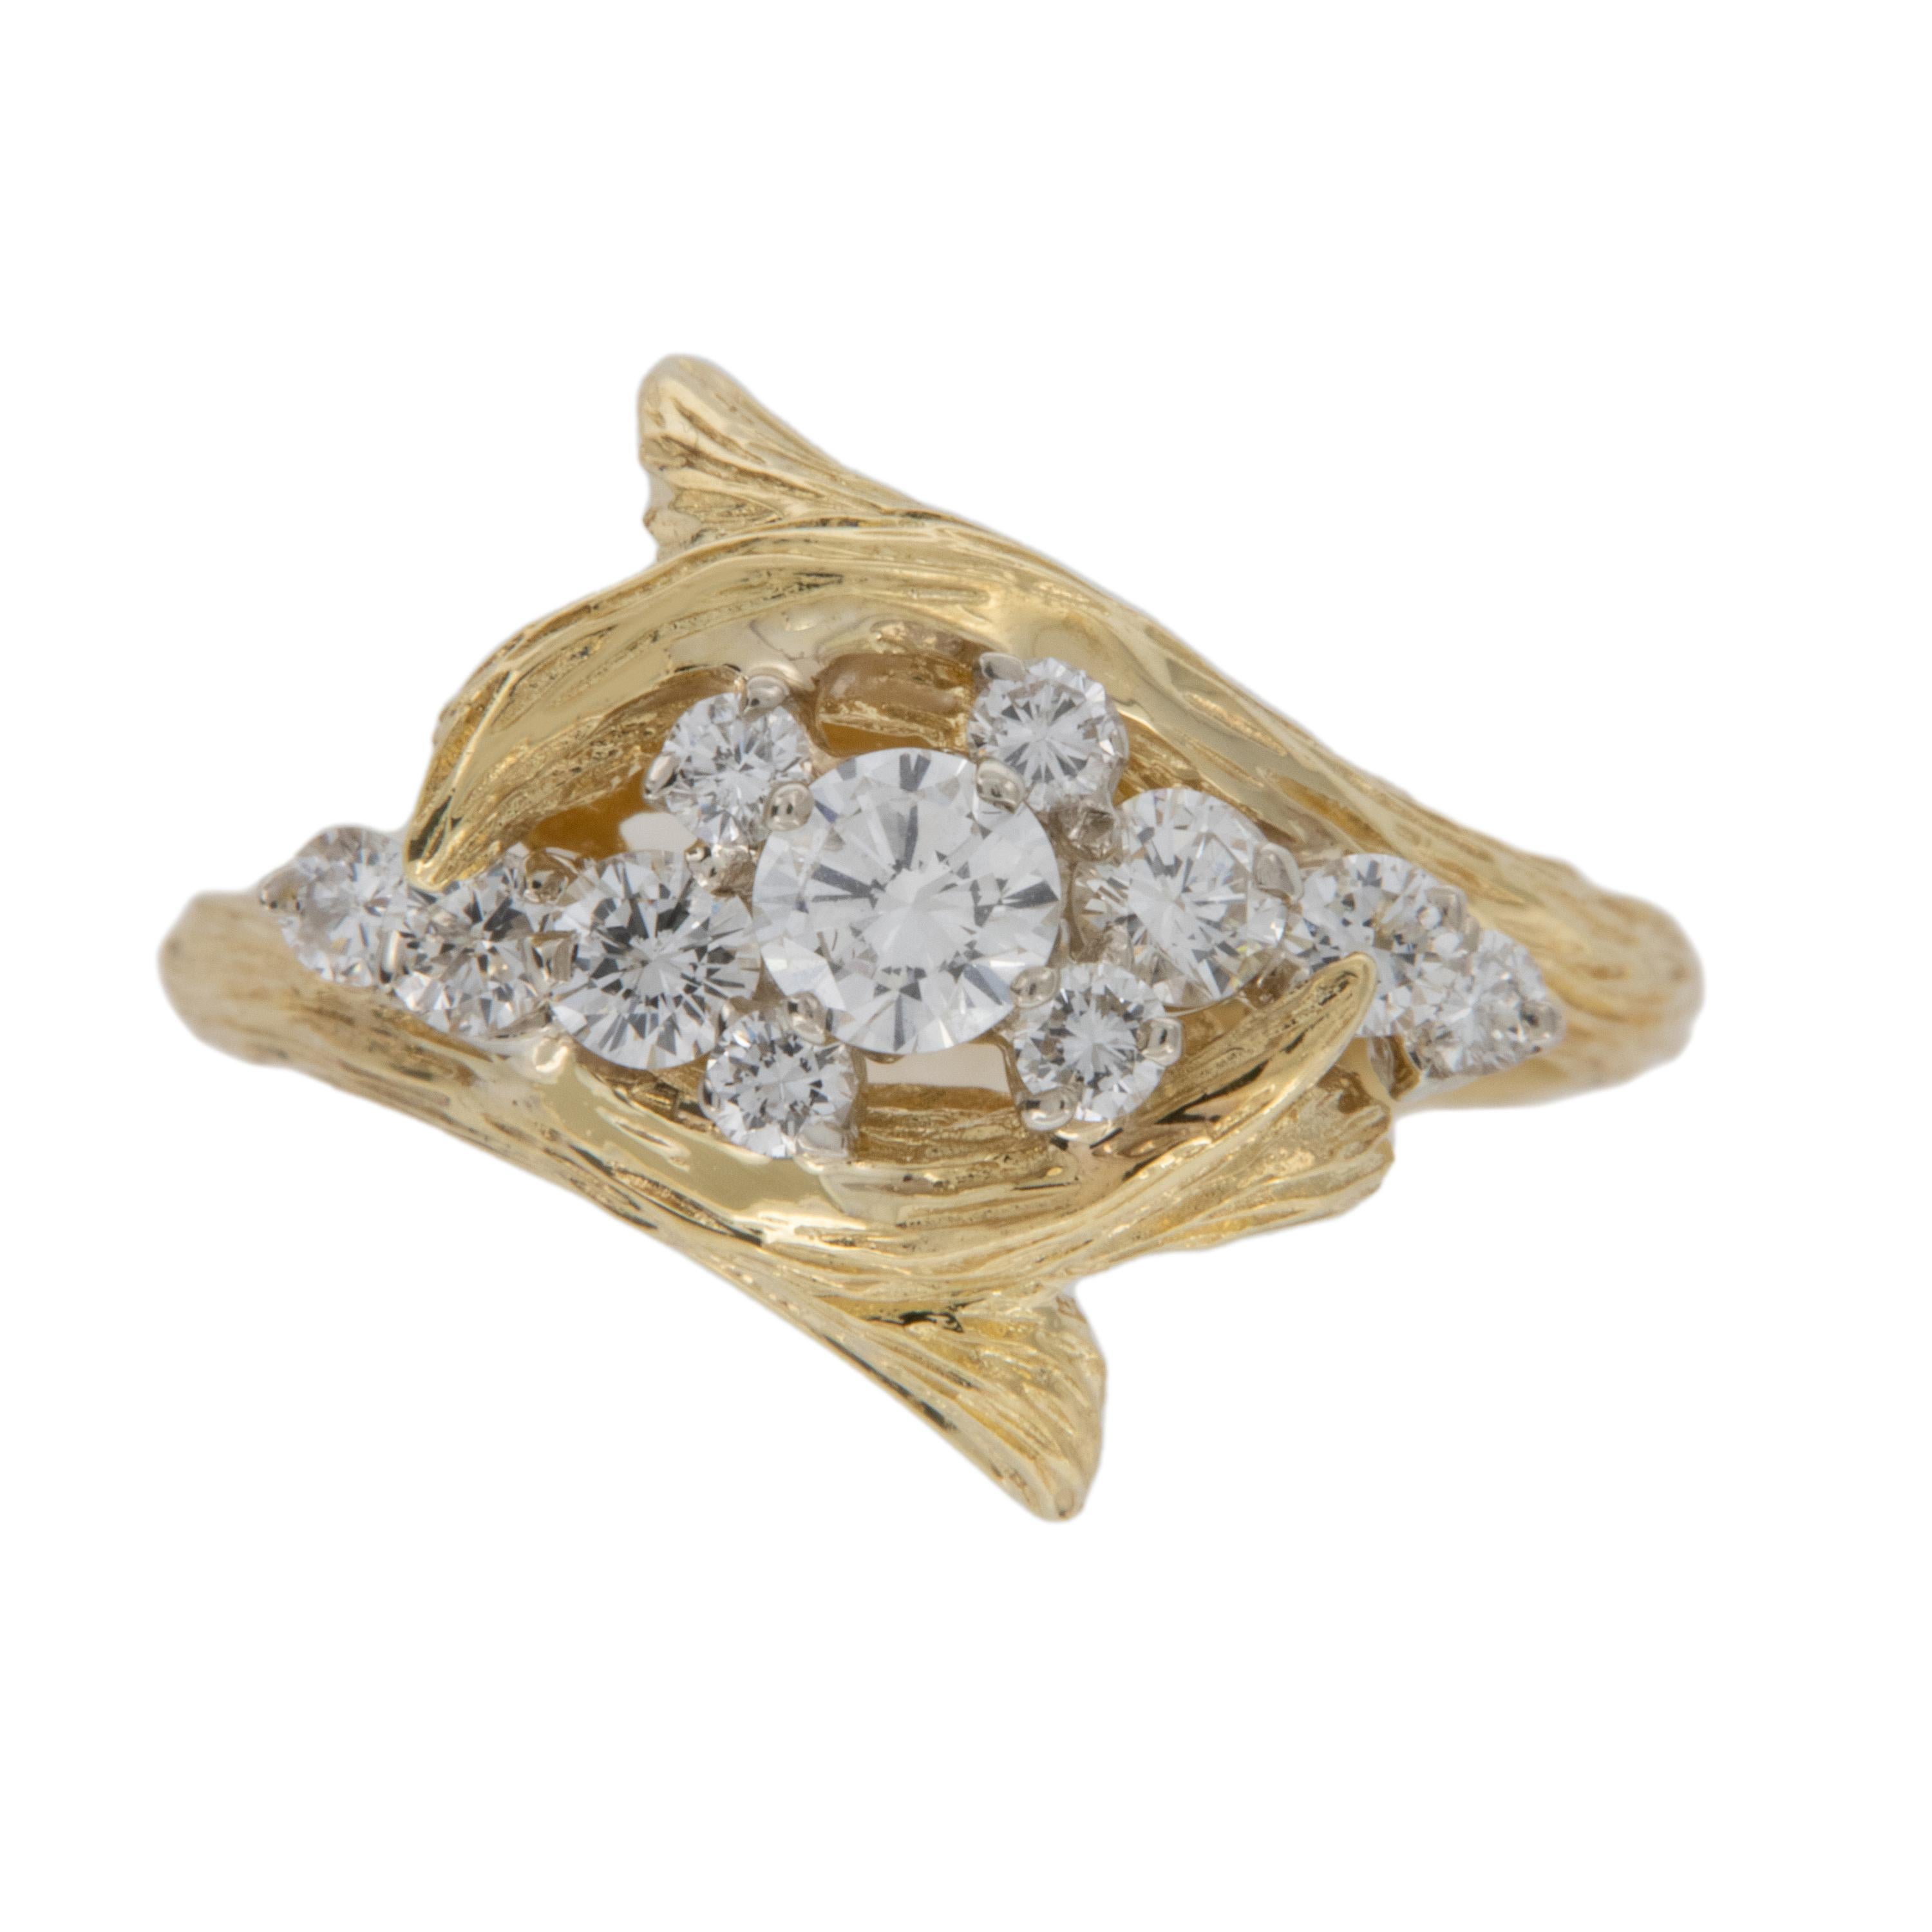 Unique and graceful, this vintage slight bypass ring in rich 18 karat yellow gold is set off with bark like finish on the elegant branches that showcase the fine VS clarity, F - G color diamonds = 0.75 Cttw. Ring is a size 7, but can be sized.